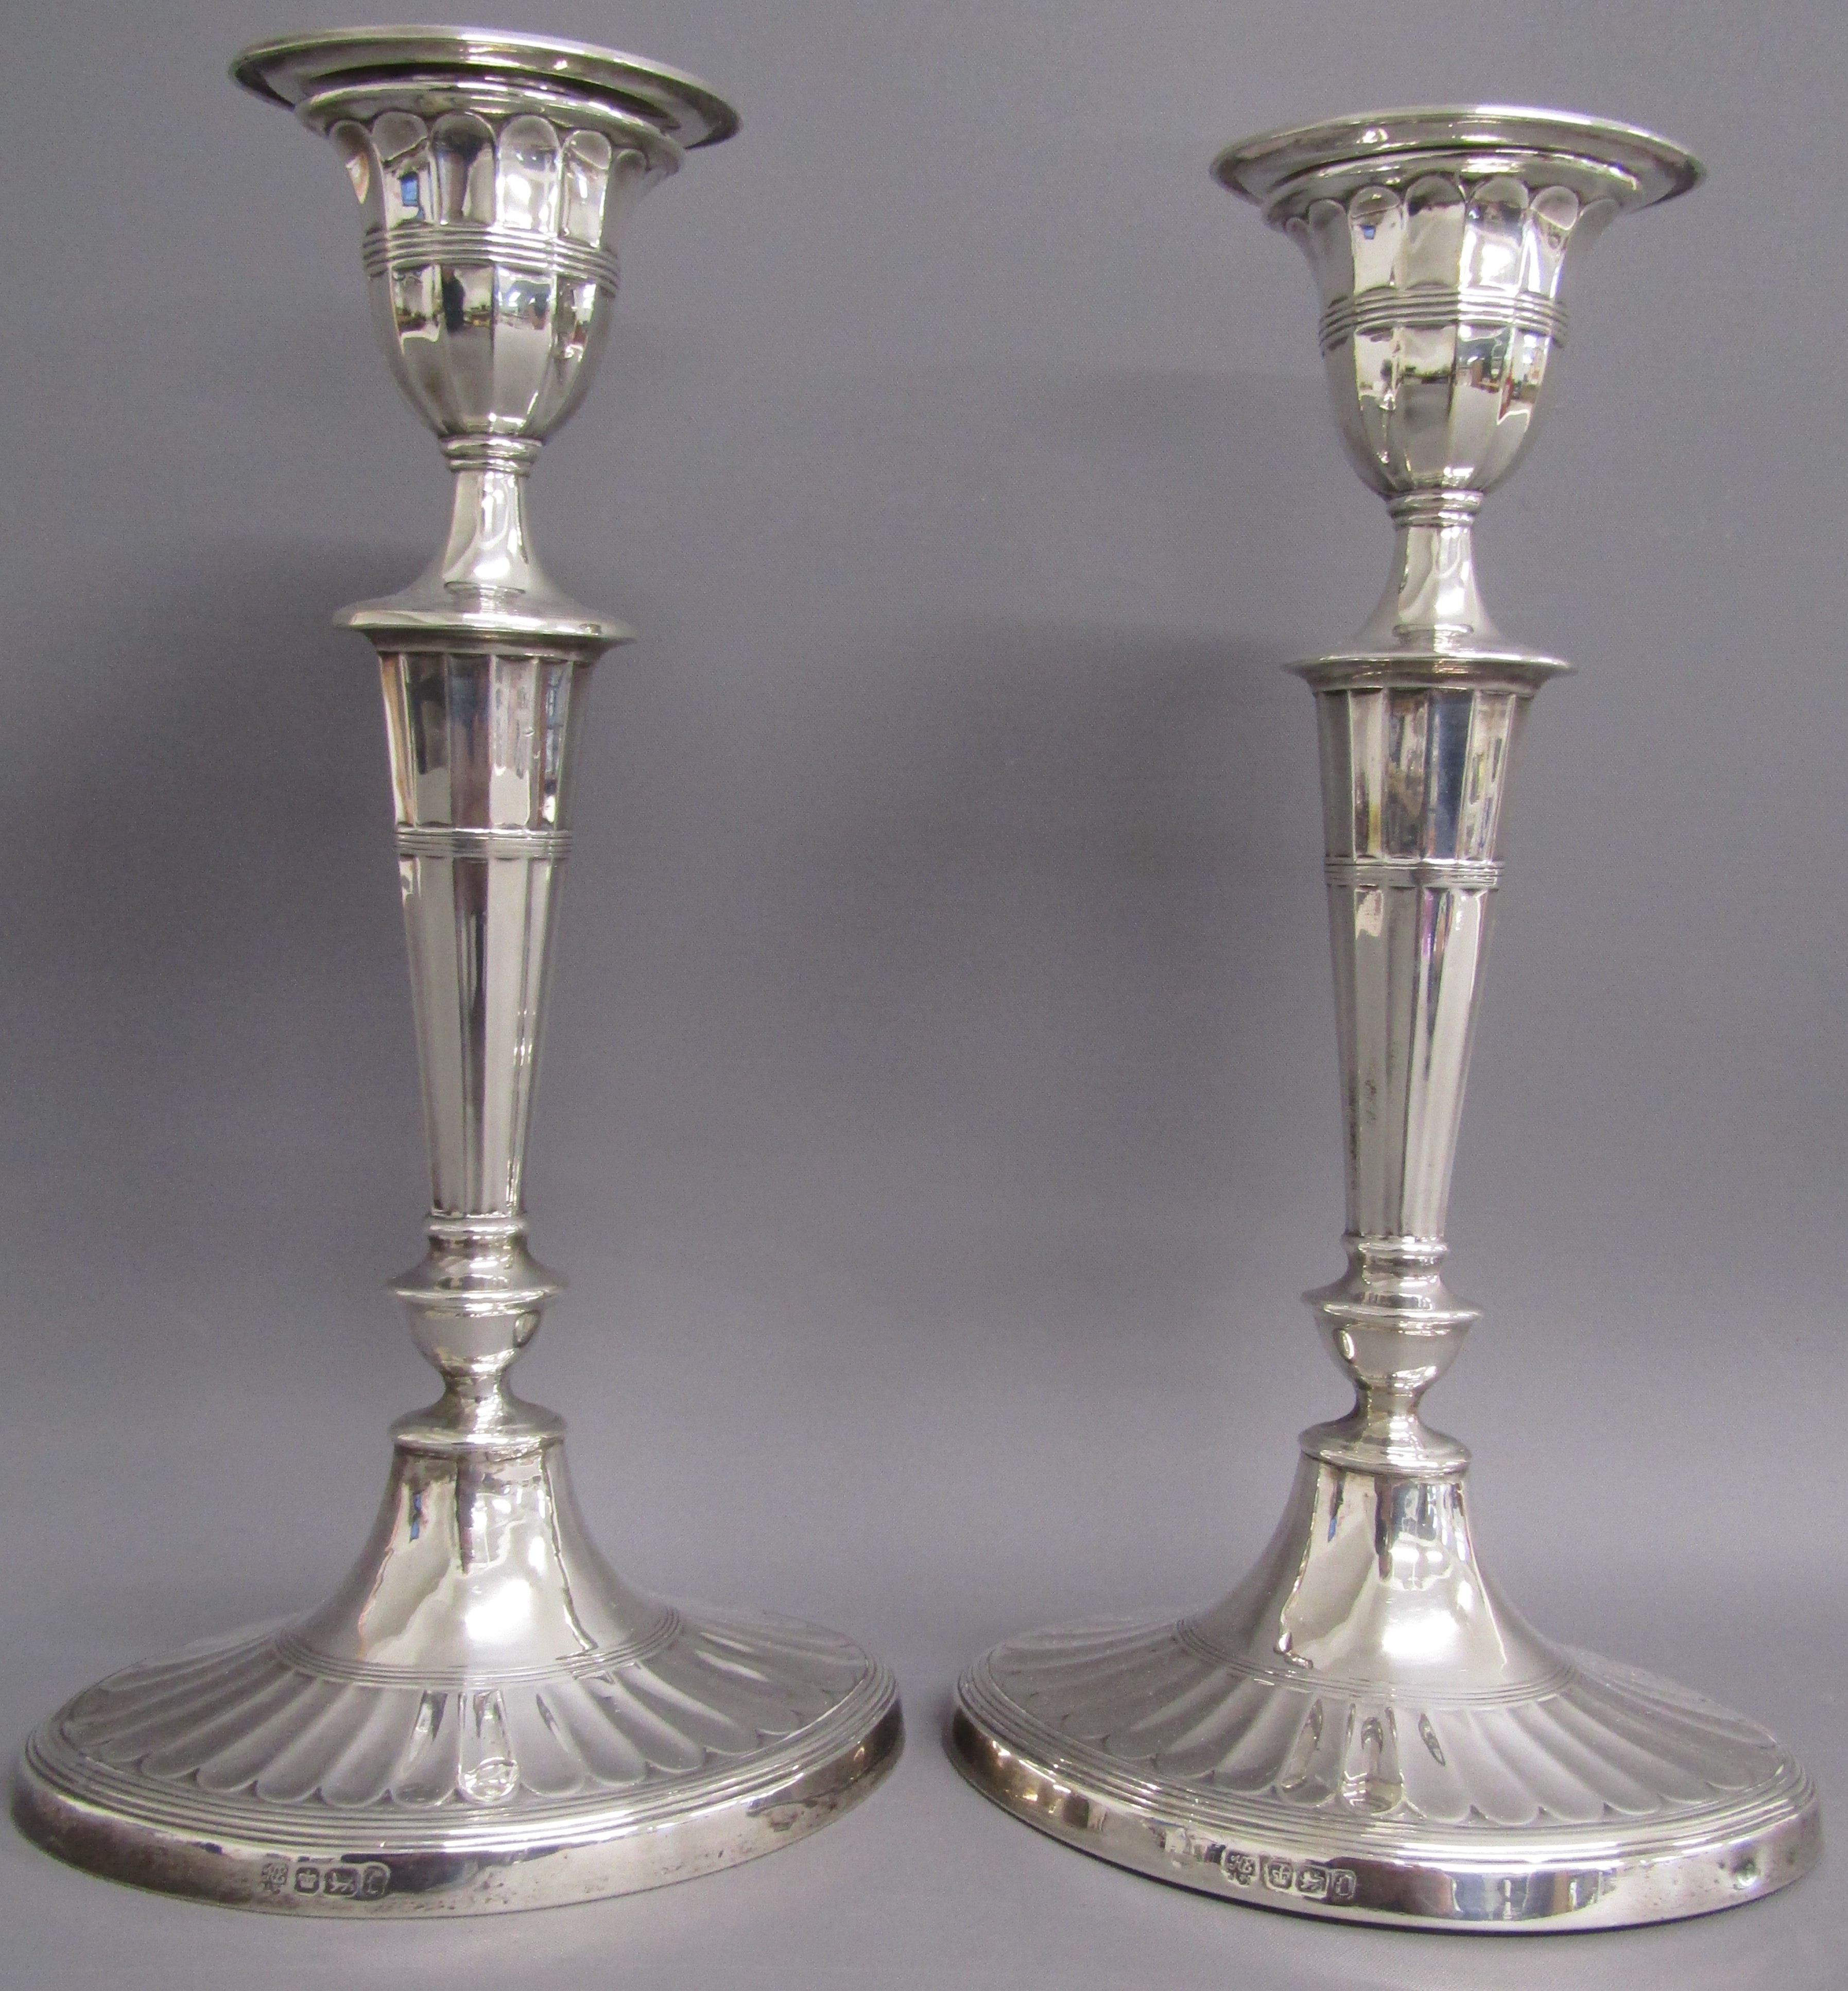 Pair of Hawksworth, Eyre & co, Sheffield 1898 weighted silver candle sticks - approx. 12cm tall